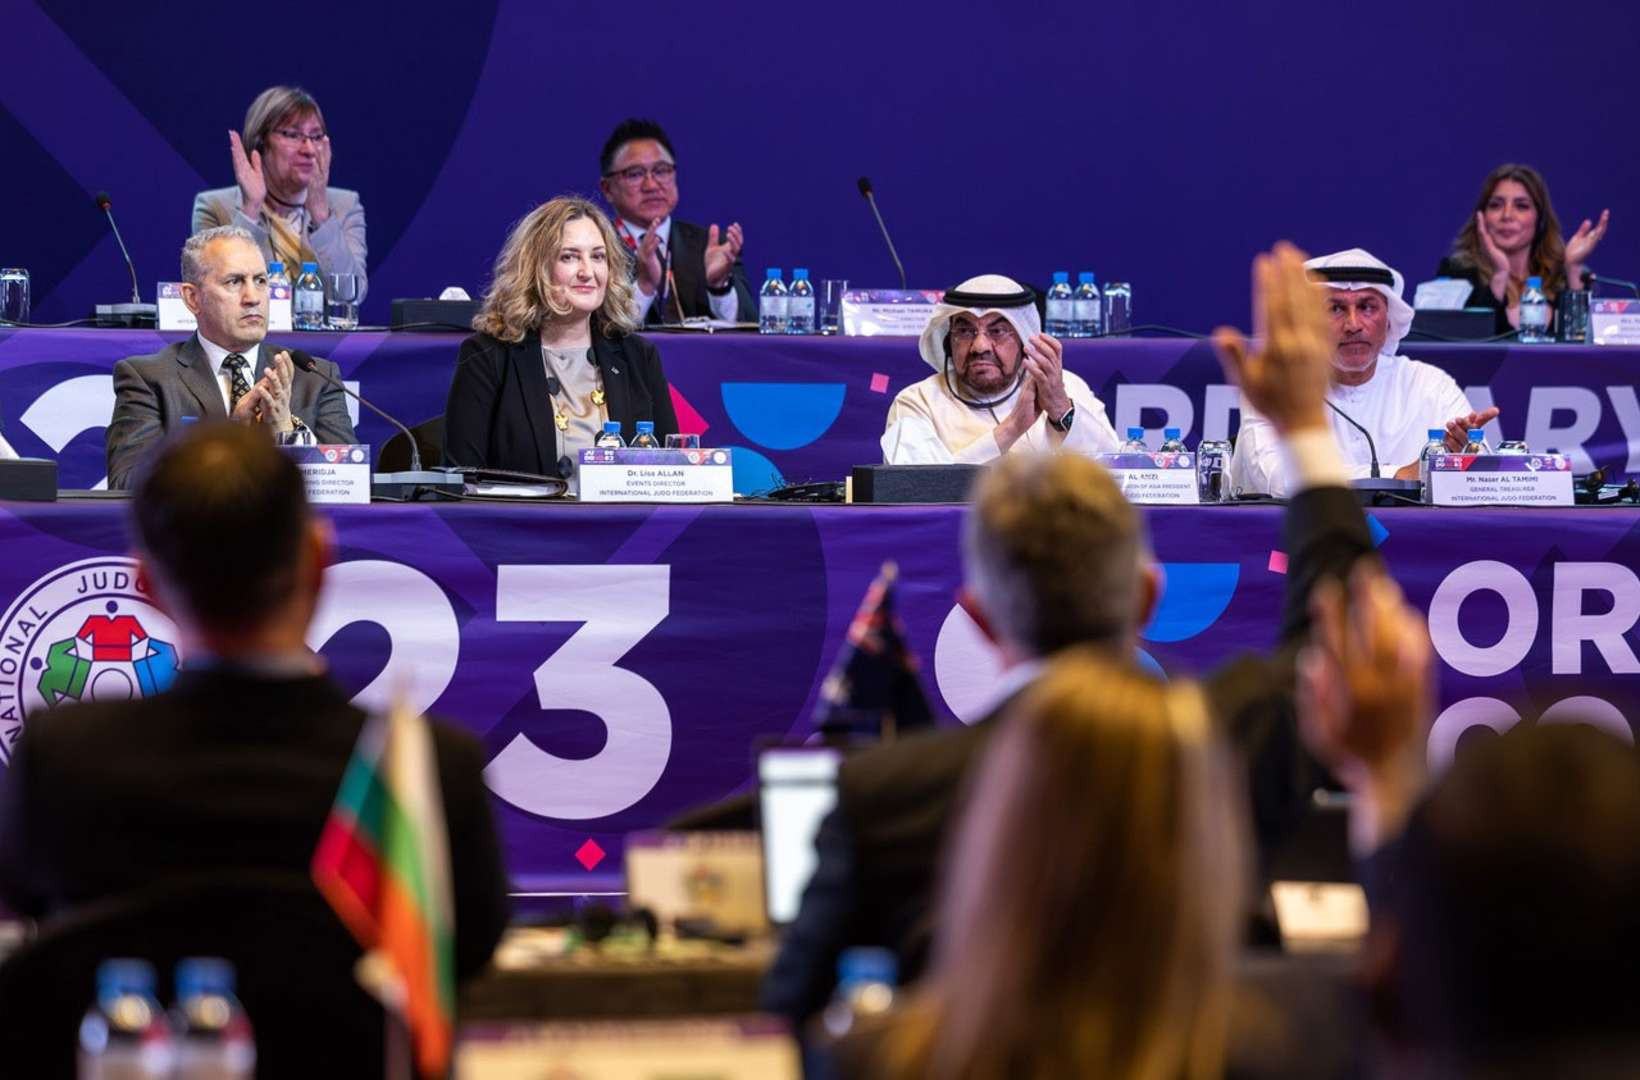 Britain's Lisa Allan, second left at front, was elected unanimously as IJF general secretary at the Congress in Doha ©IJF